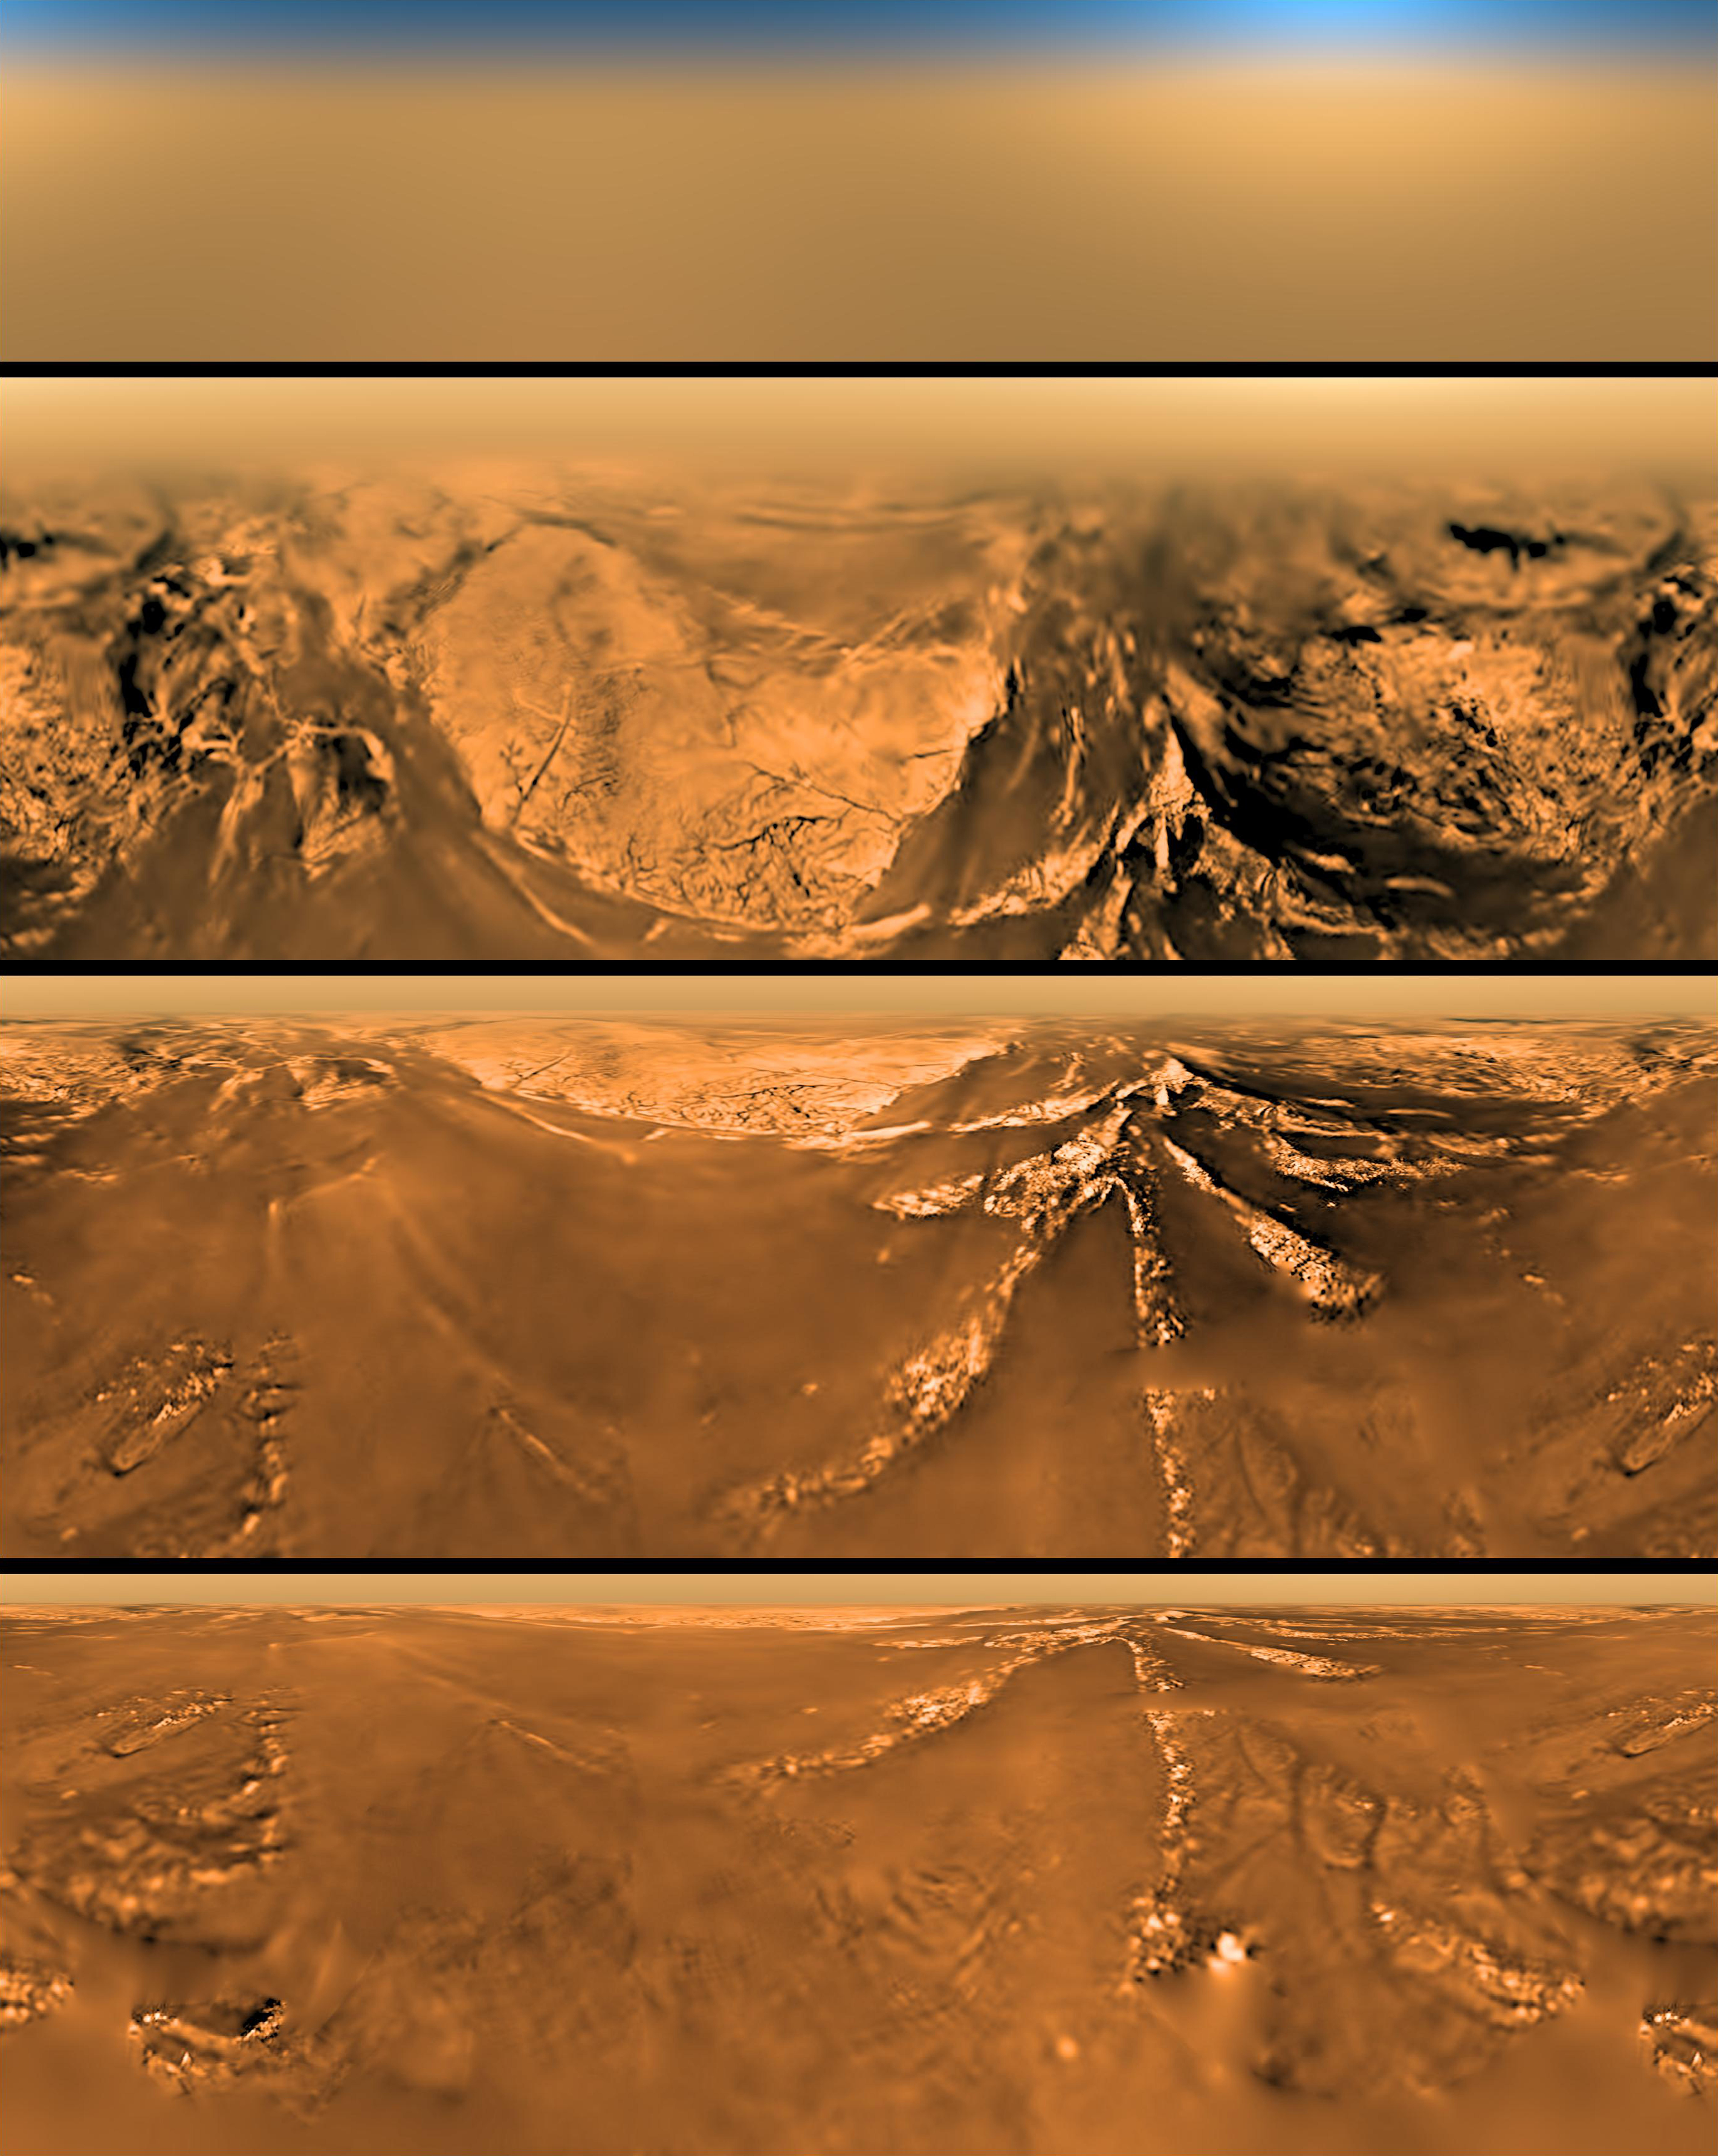 Montage showing a series of views from the European Space Agency's Huygens probe at four different altitudes